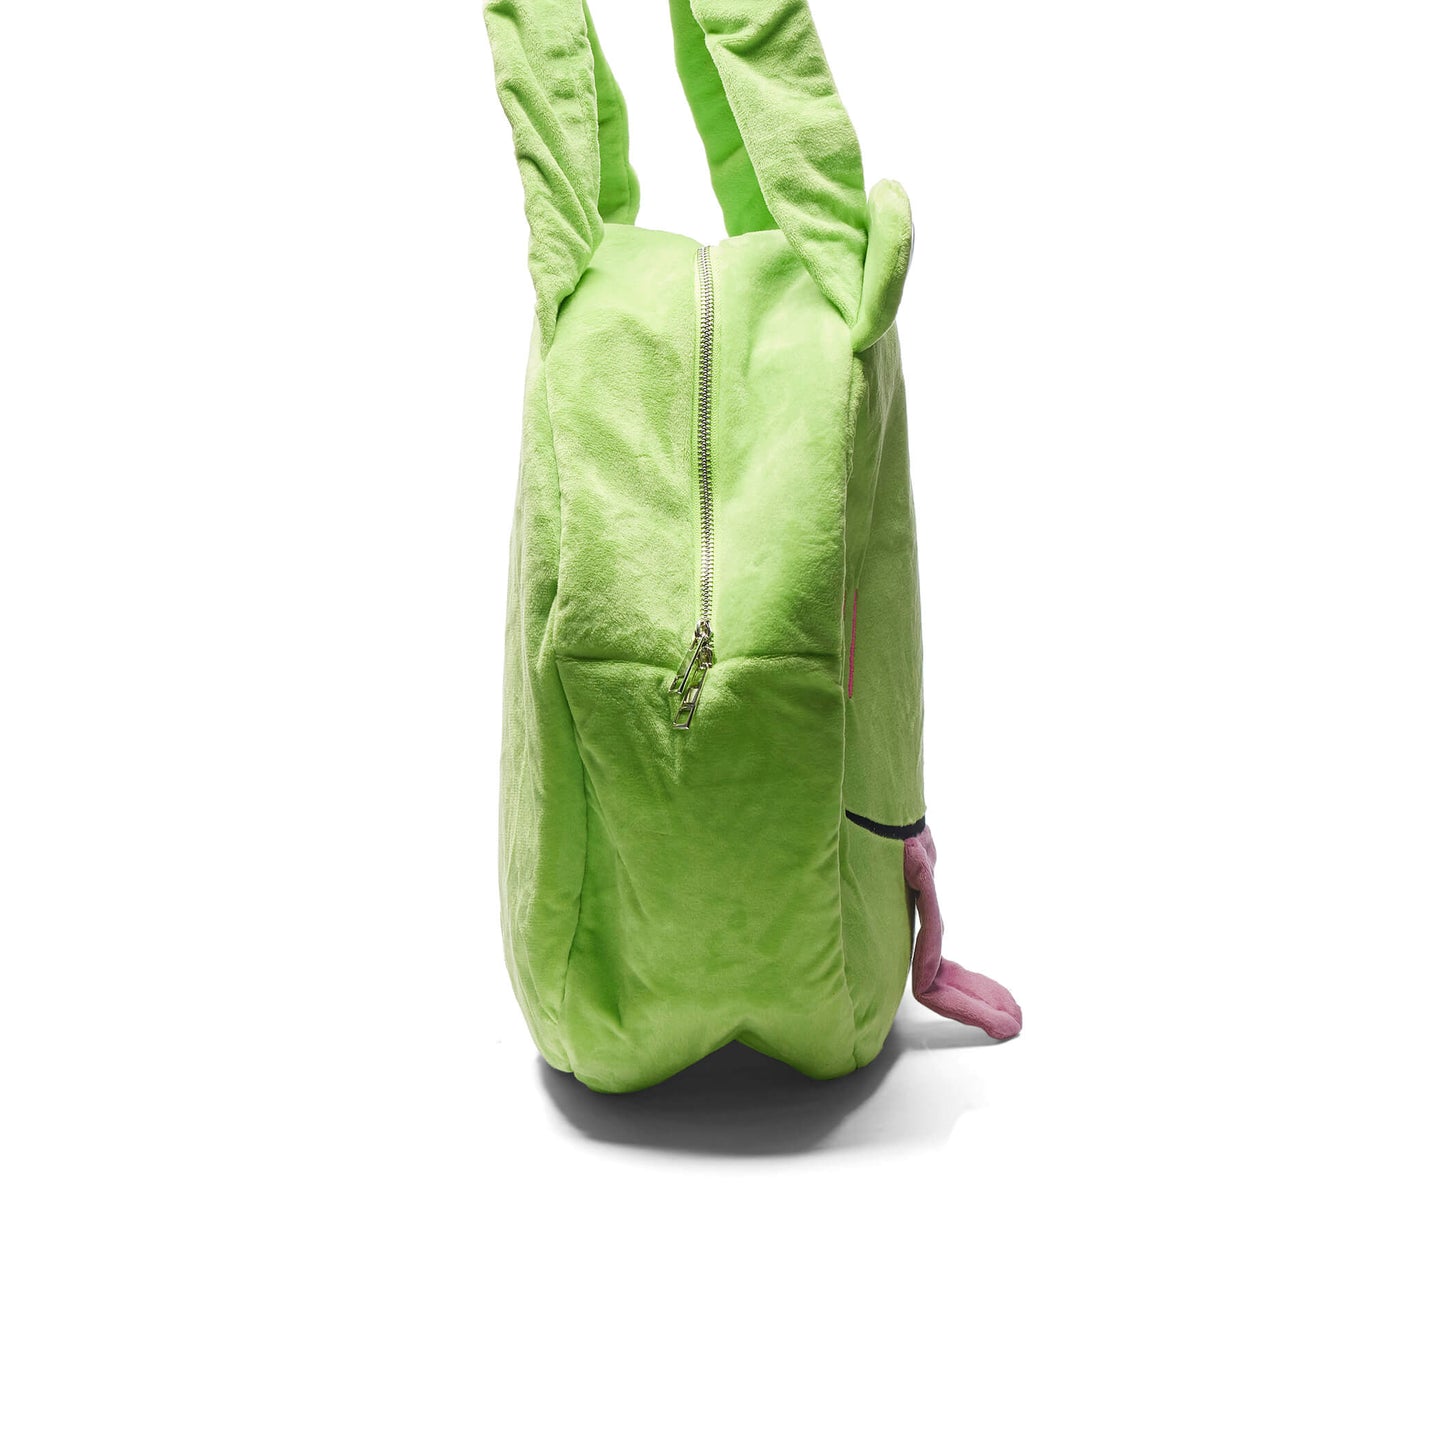 Bevvy the Frog Bag - Accessories - KOI Footwear - Green - Side View